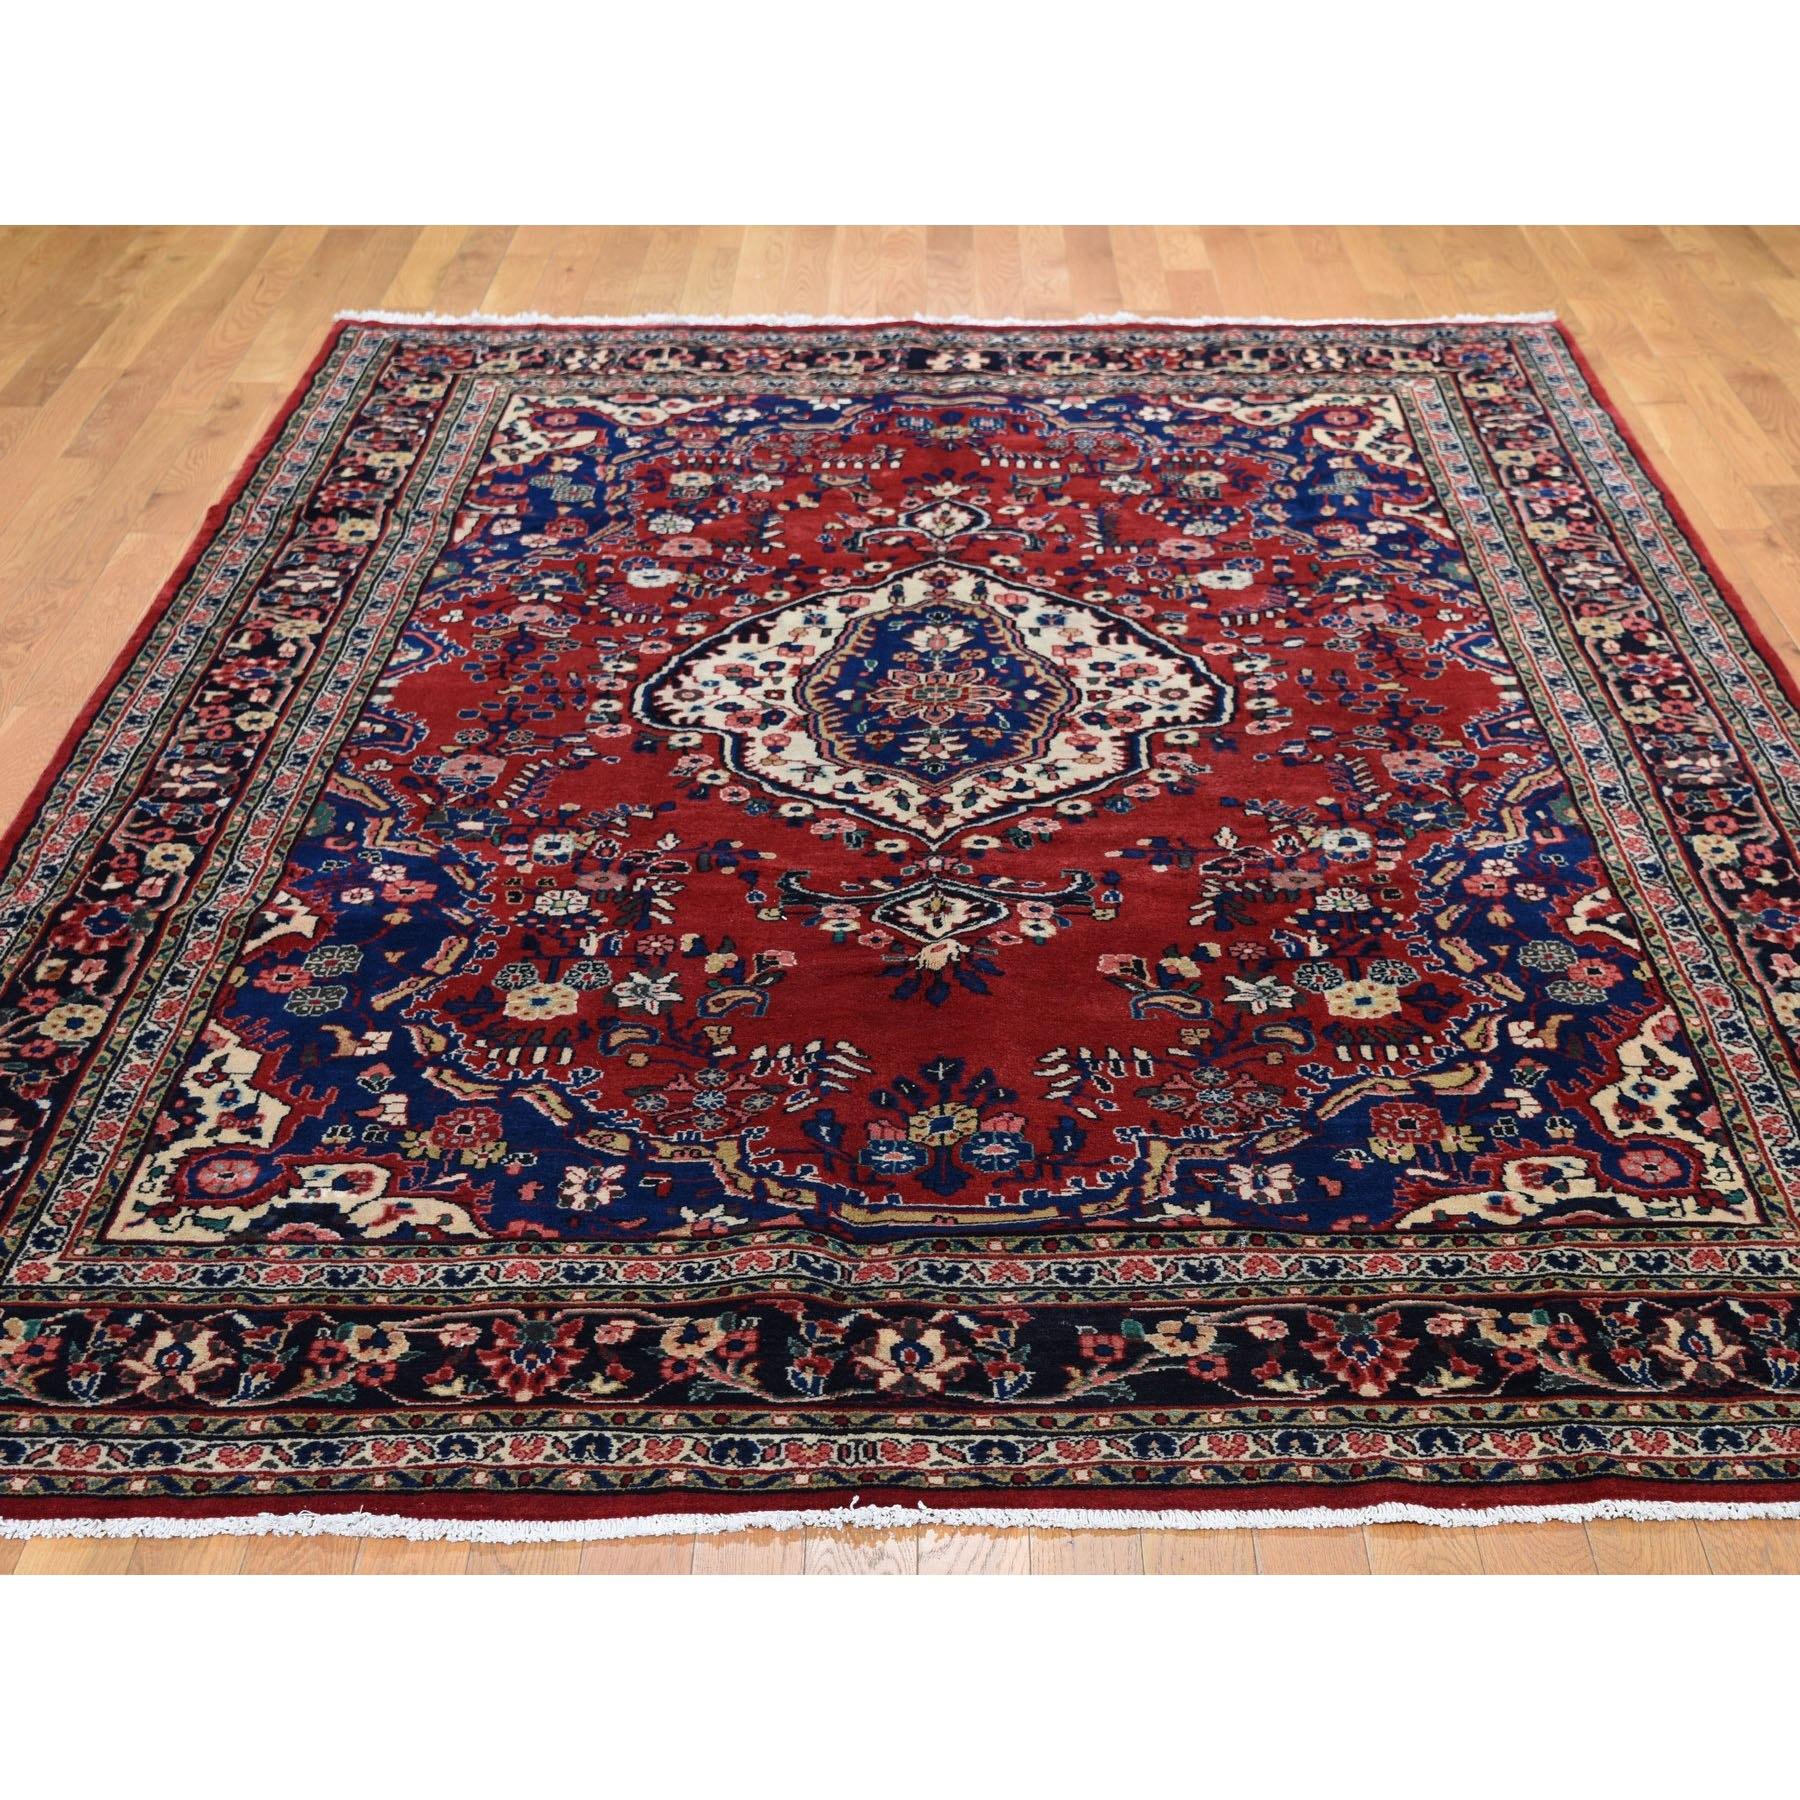 Hollywood Regency Red Persian Bibikabad Exc Condition Pure Wool Hand Knotted Rug, 6'8